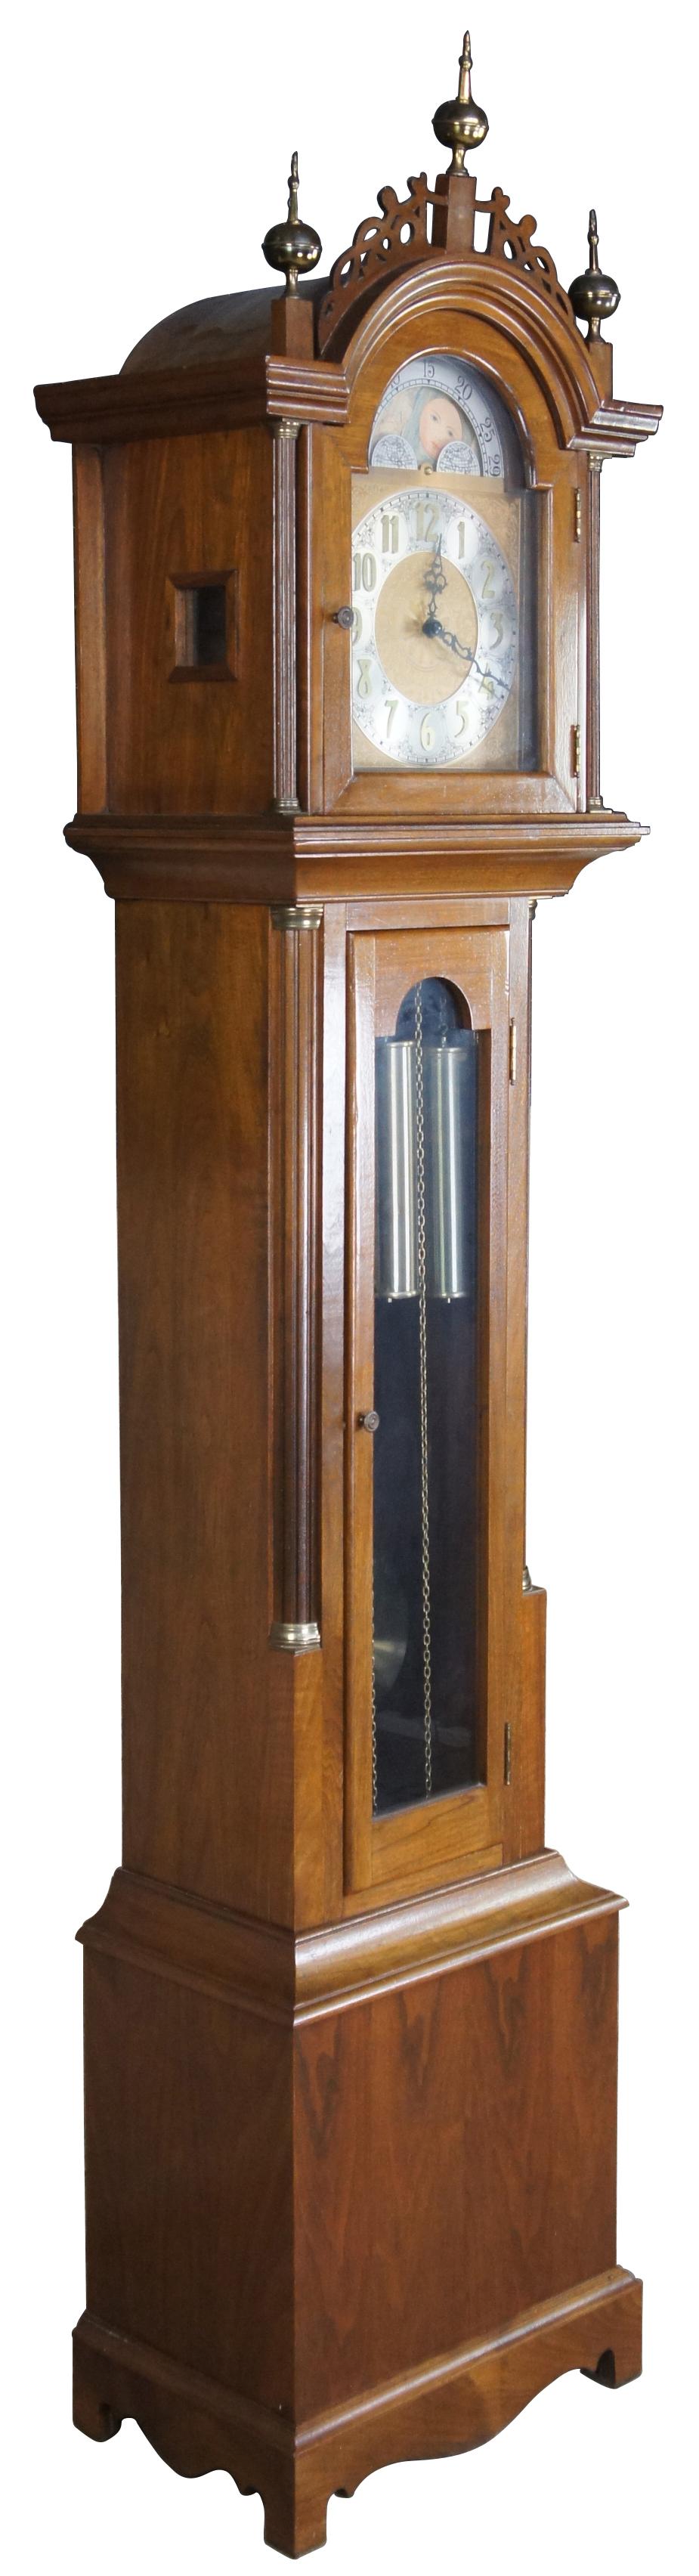 Handcrafted grandfather clock built by Jeff Sutton in 1969. Made from walnut in Georgian styling with fretwork crown, brass finials and peakaboo windows along the side of case. Includes modern works with sun and moon dial

Measures: 20.5